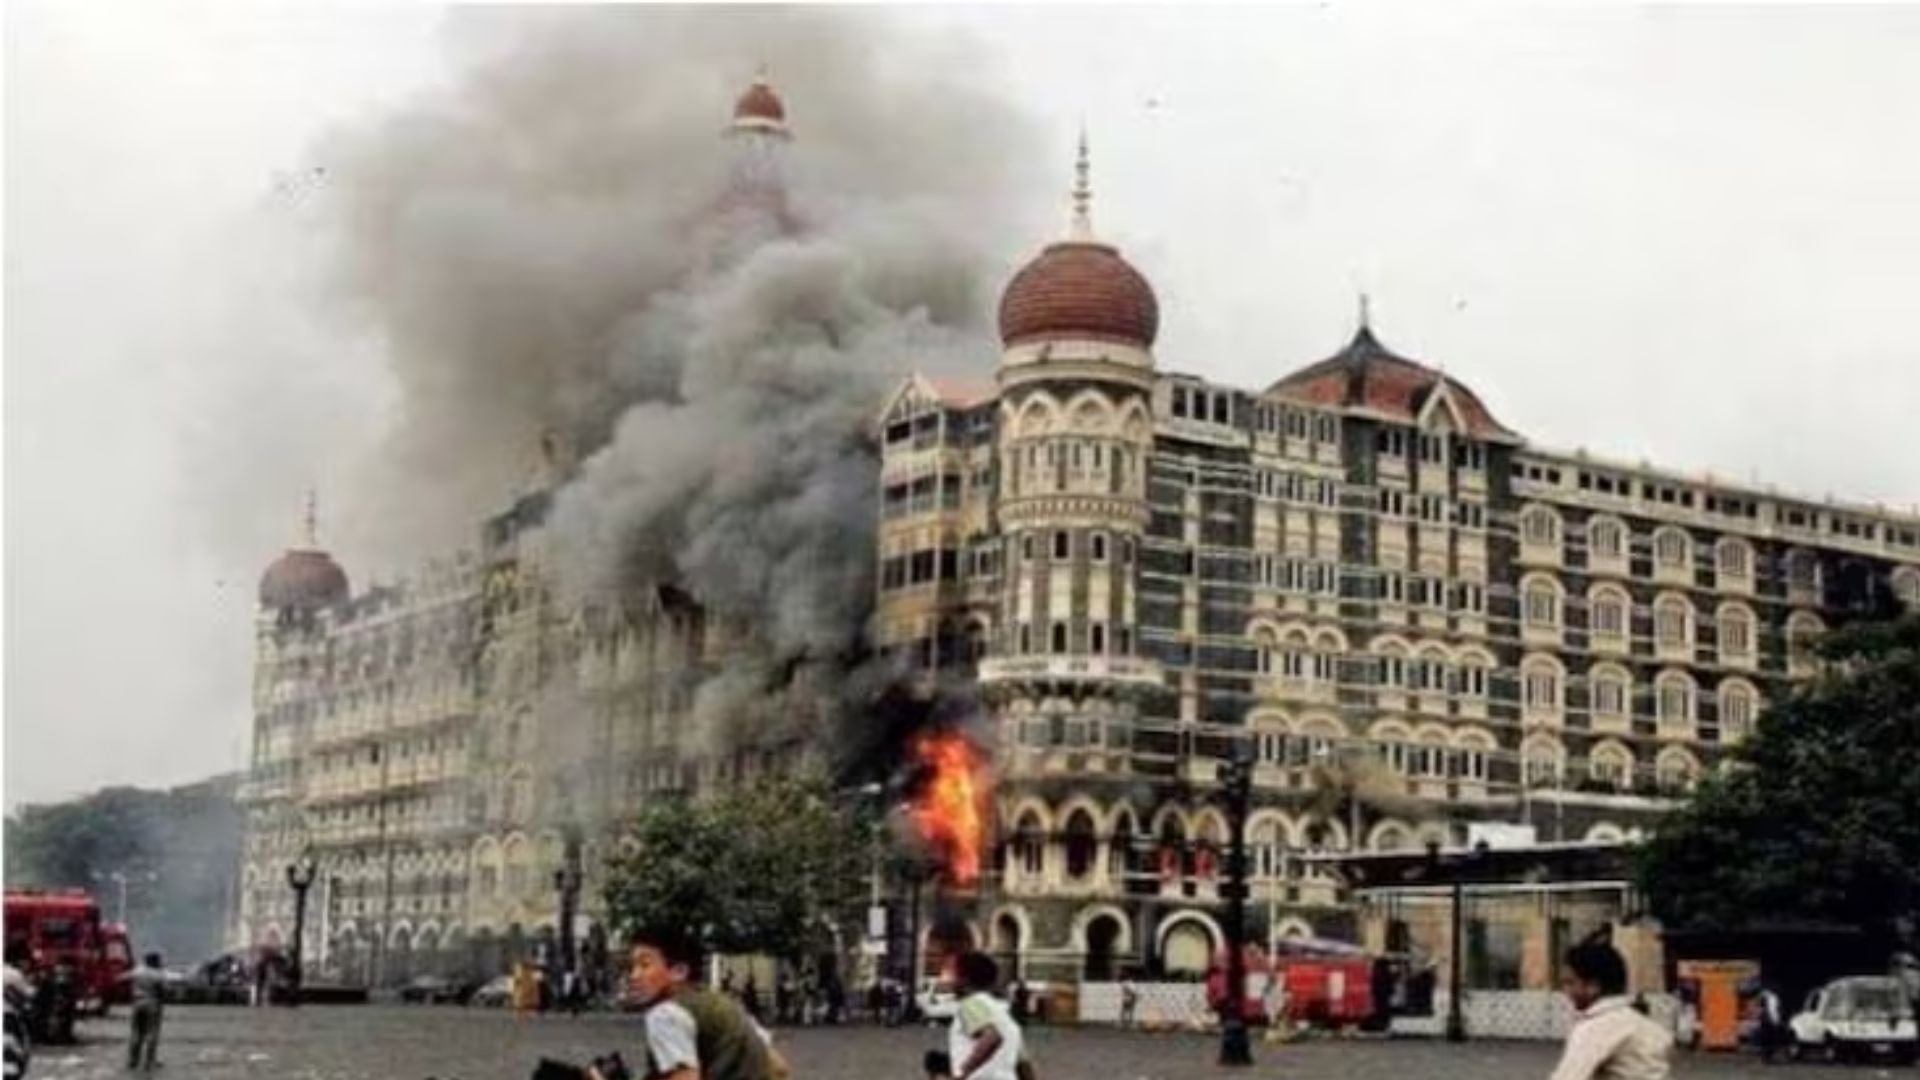 US envoy on 26/11 anniversary: “We pledge to continue fight against acts of terror”